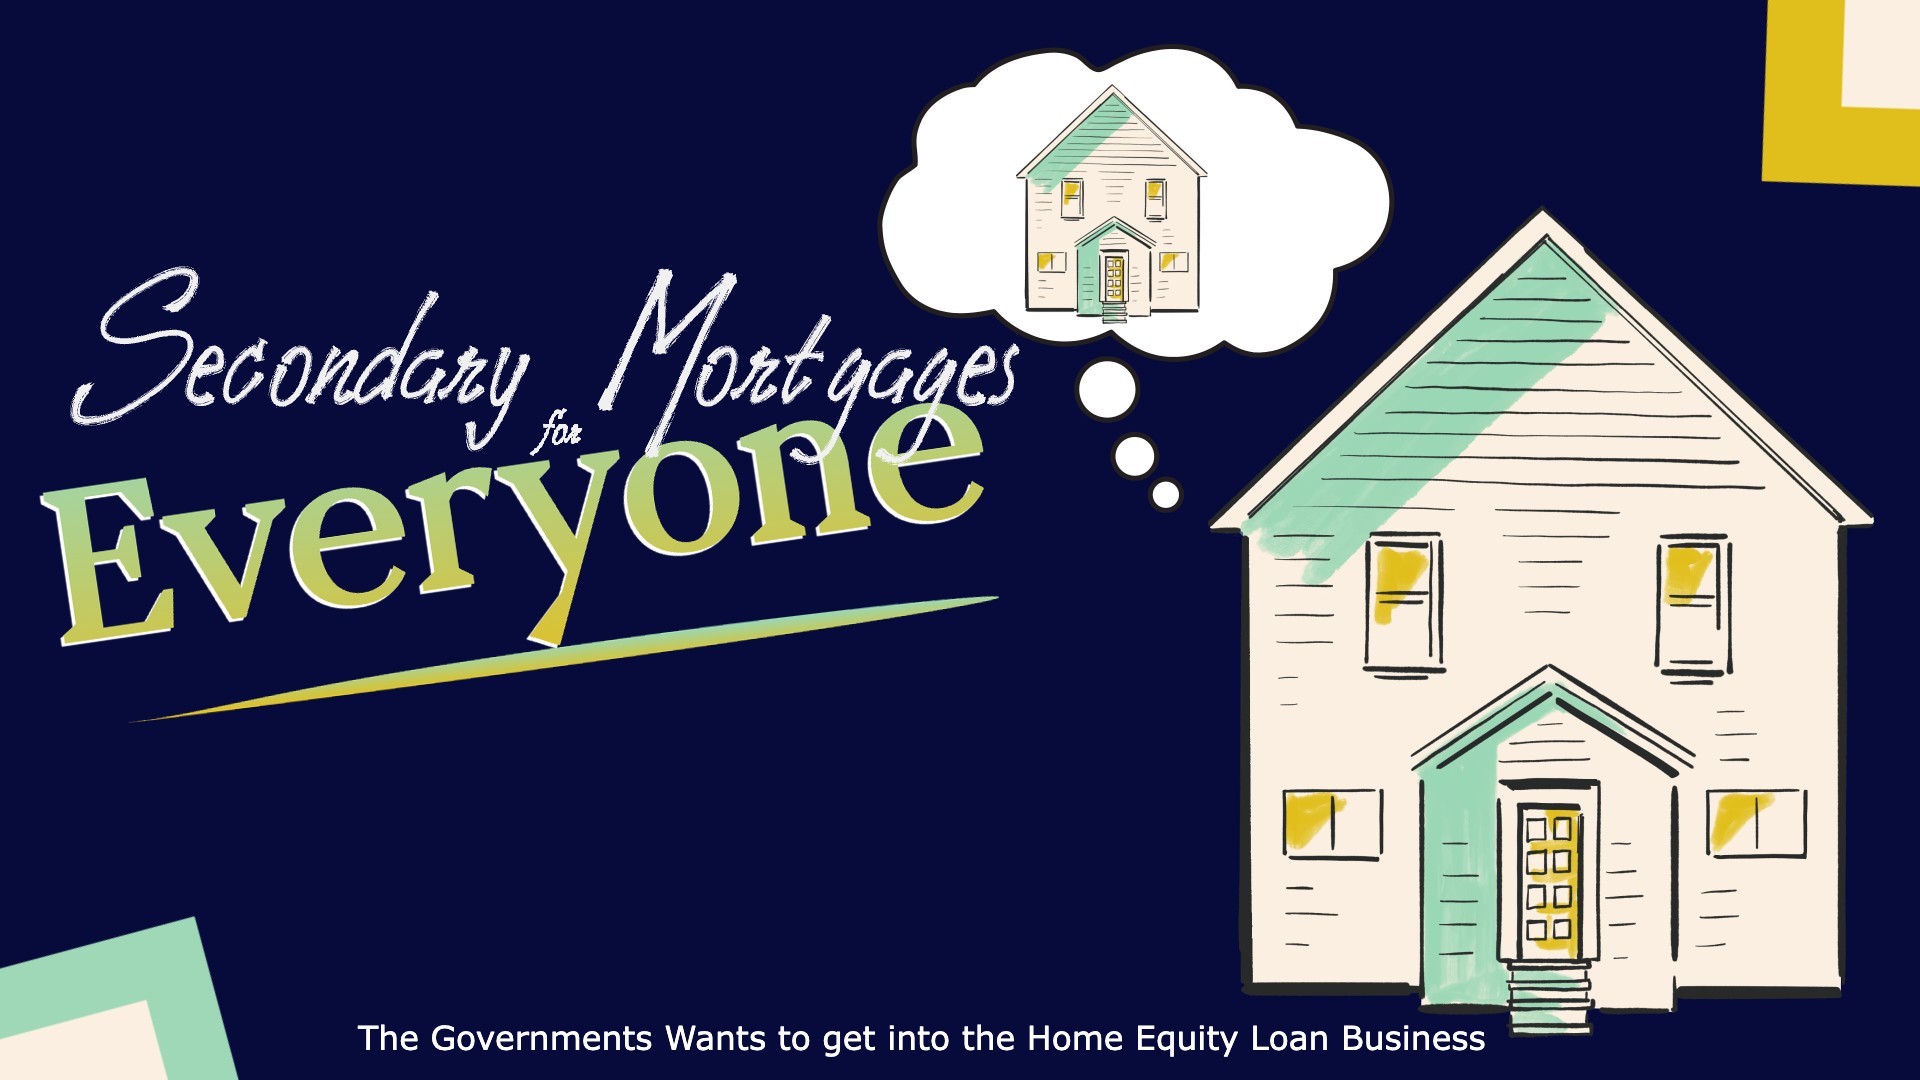 Secondary Mortgages for Everyone